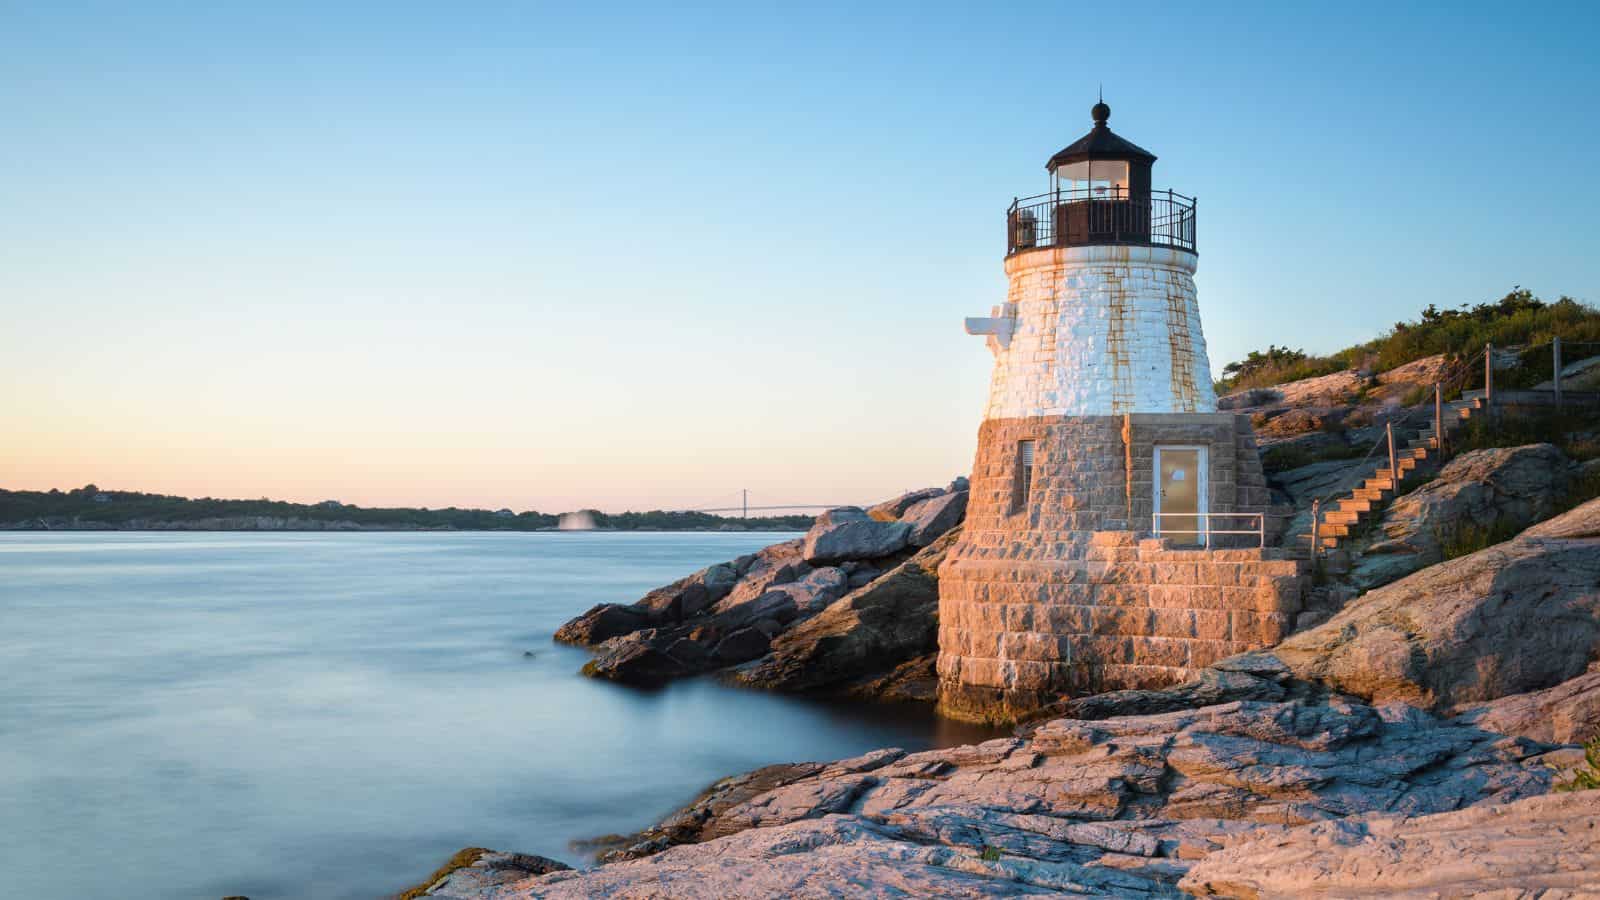 19 Charming Small Towns in New England to Visit This Summer